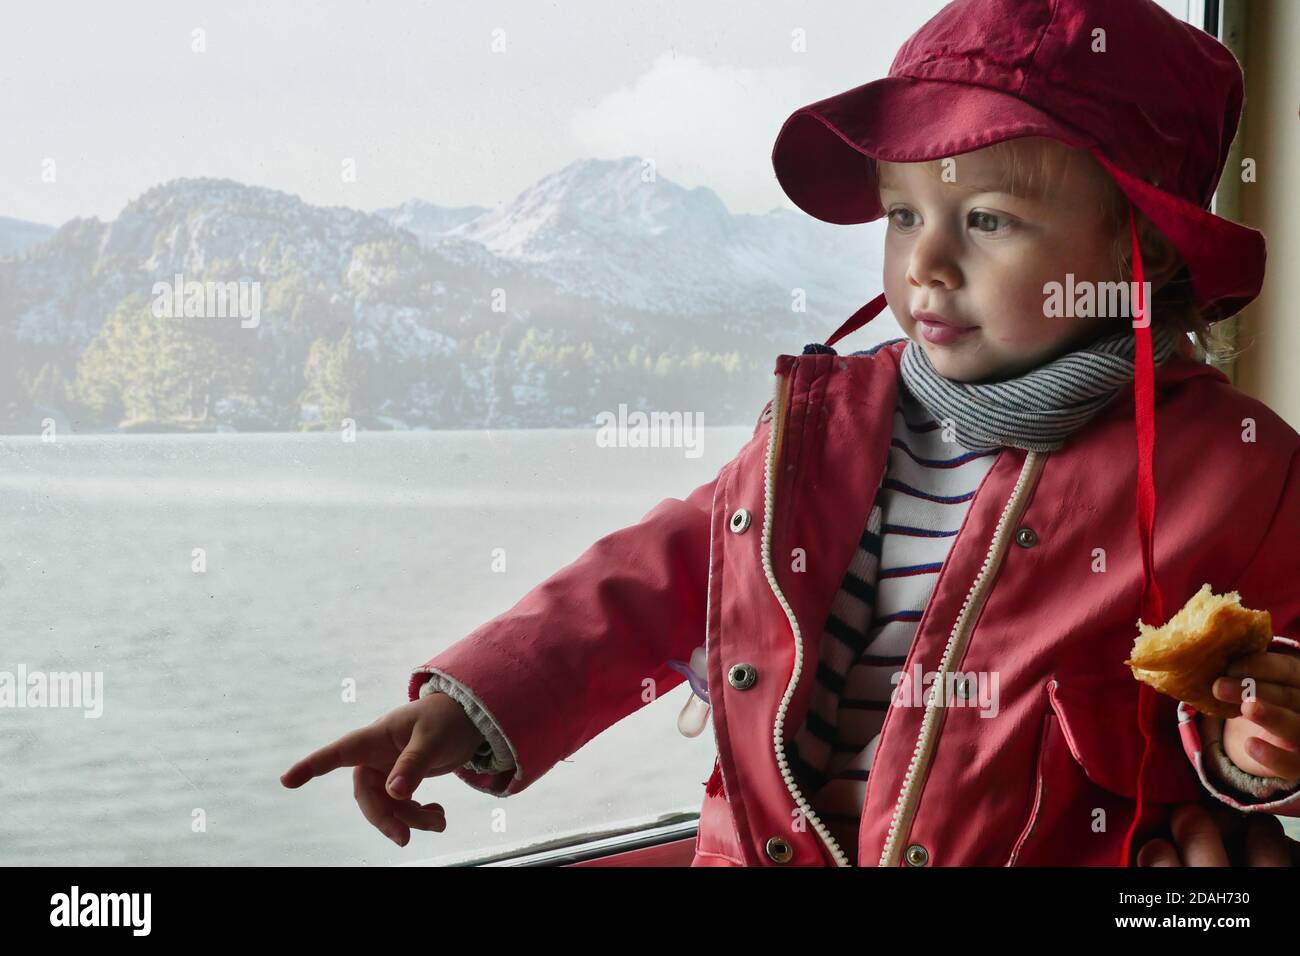 Toddler dressed in coat and hat optioning and looking away. Lake and mountain scenic background. Medium shot. Stock Photo